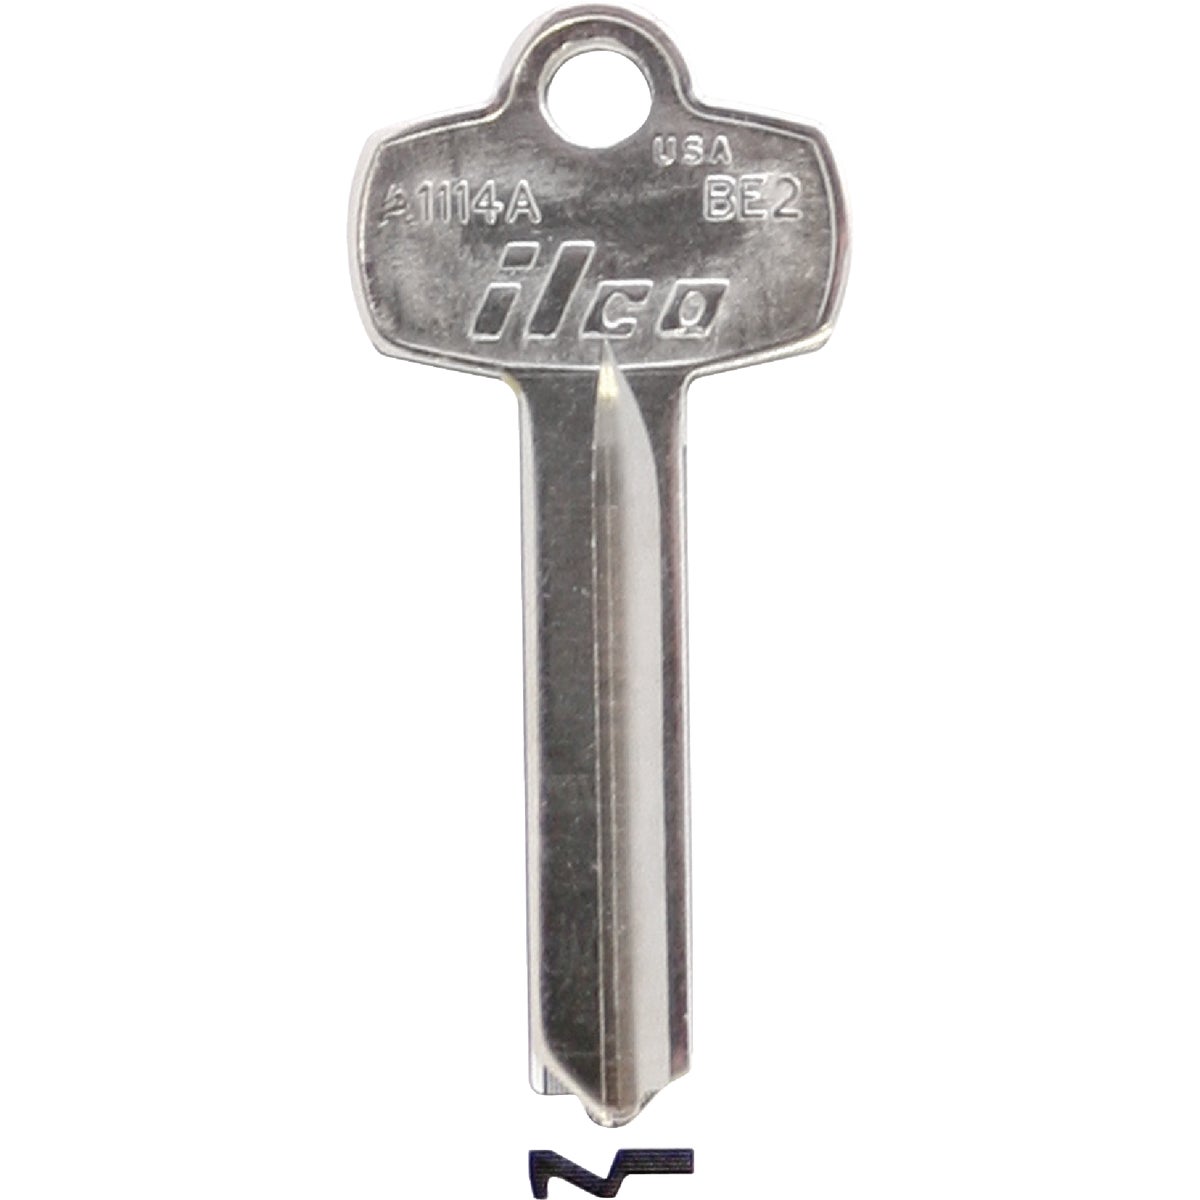 ILCO Best Nickel Plated Padlock Key BE2 / A1114A (10-Pack)